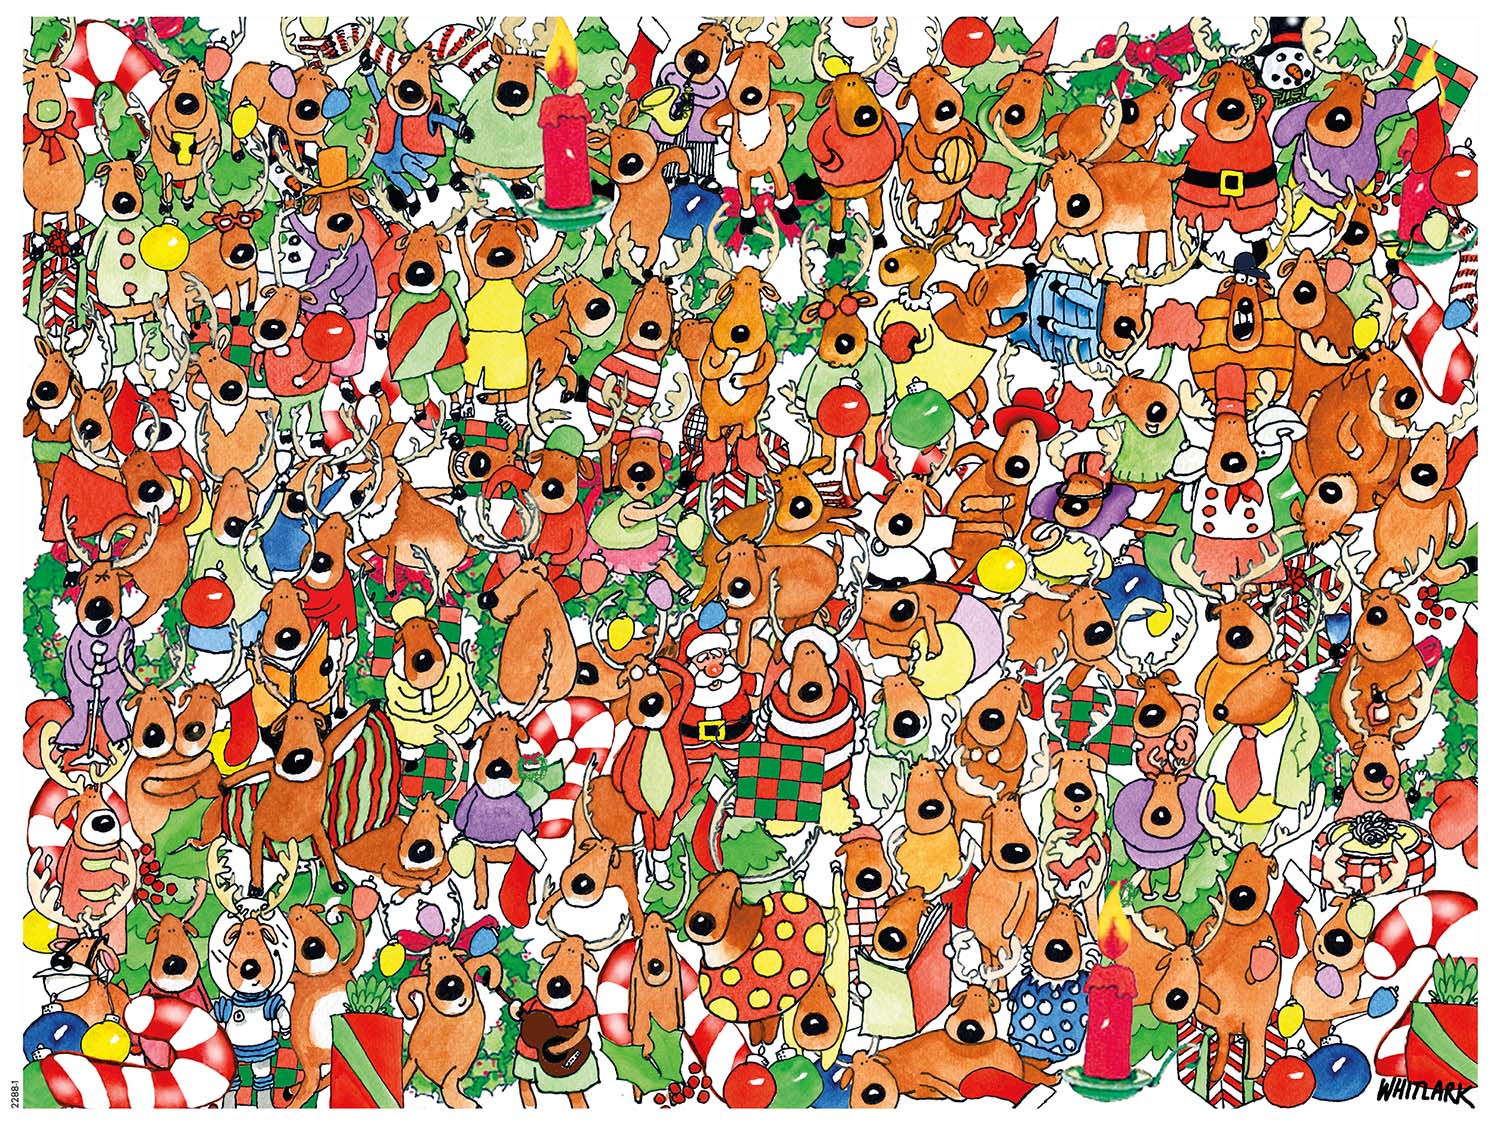 One Hundred and One Reindeer and a Santa Christmas Jigsaw Puzzle